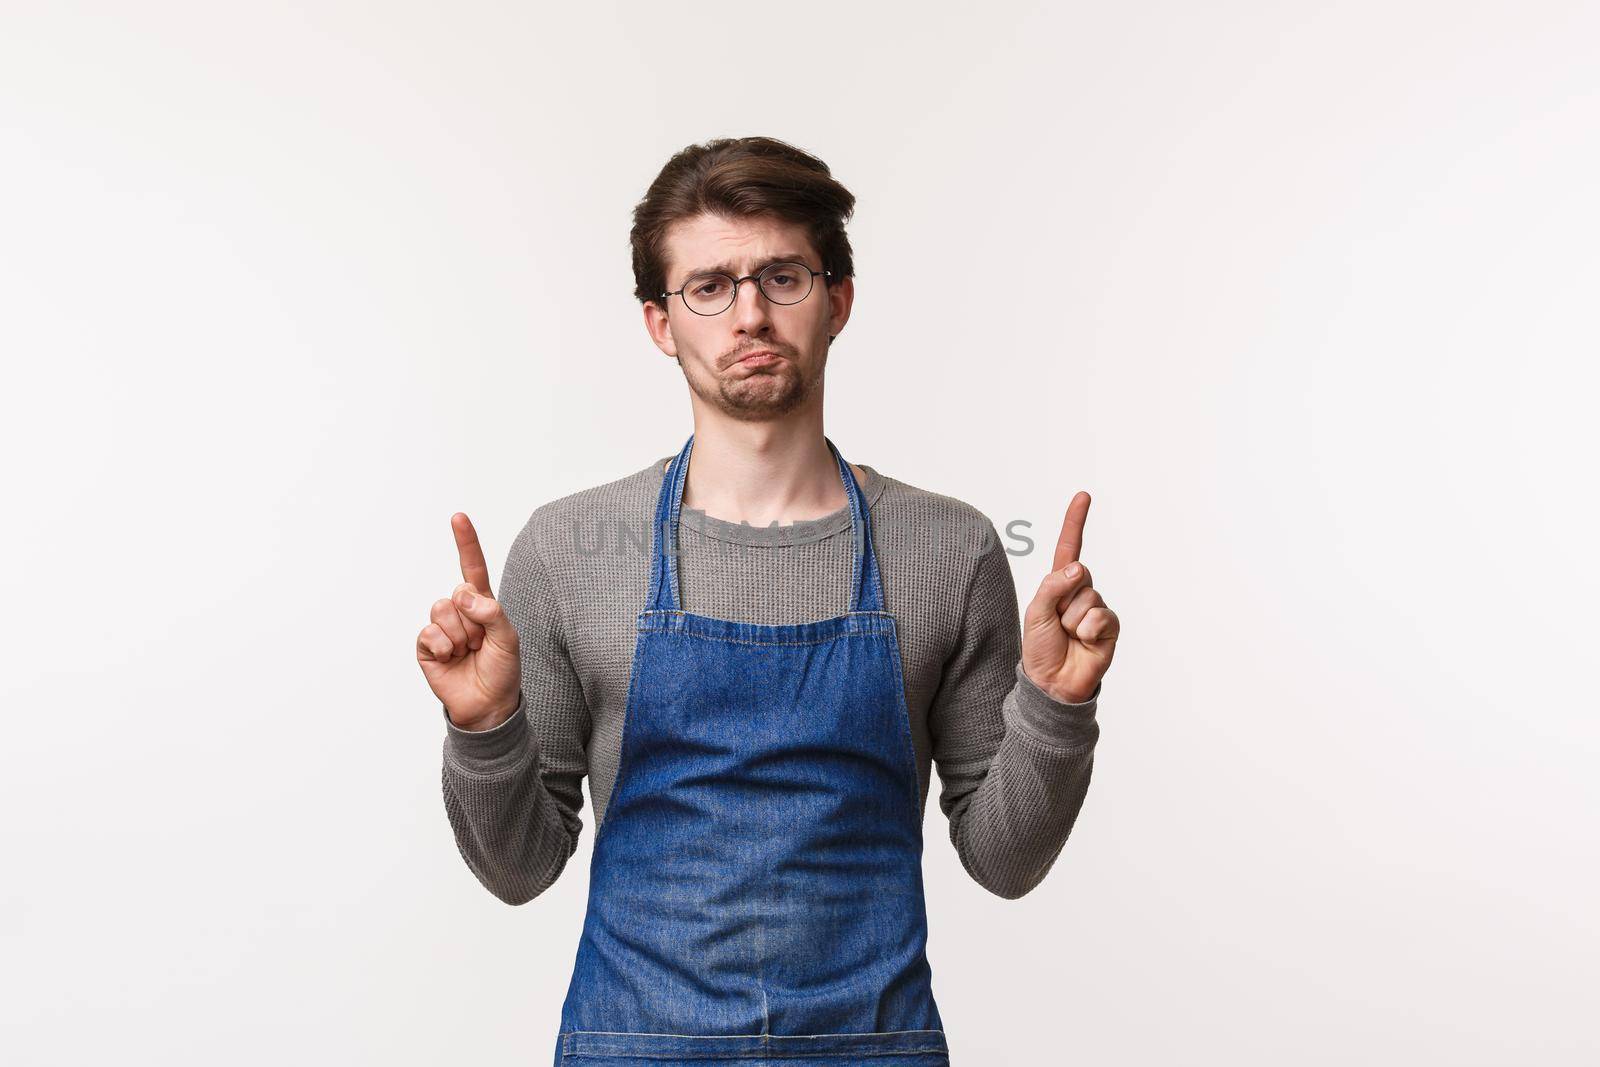 Portrait of gloomy and indifferent young bored guy working coffee shop or restaurant over bar counter, wear apron, grimace bothered and upset as pointing up at something disappointing.